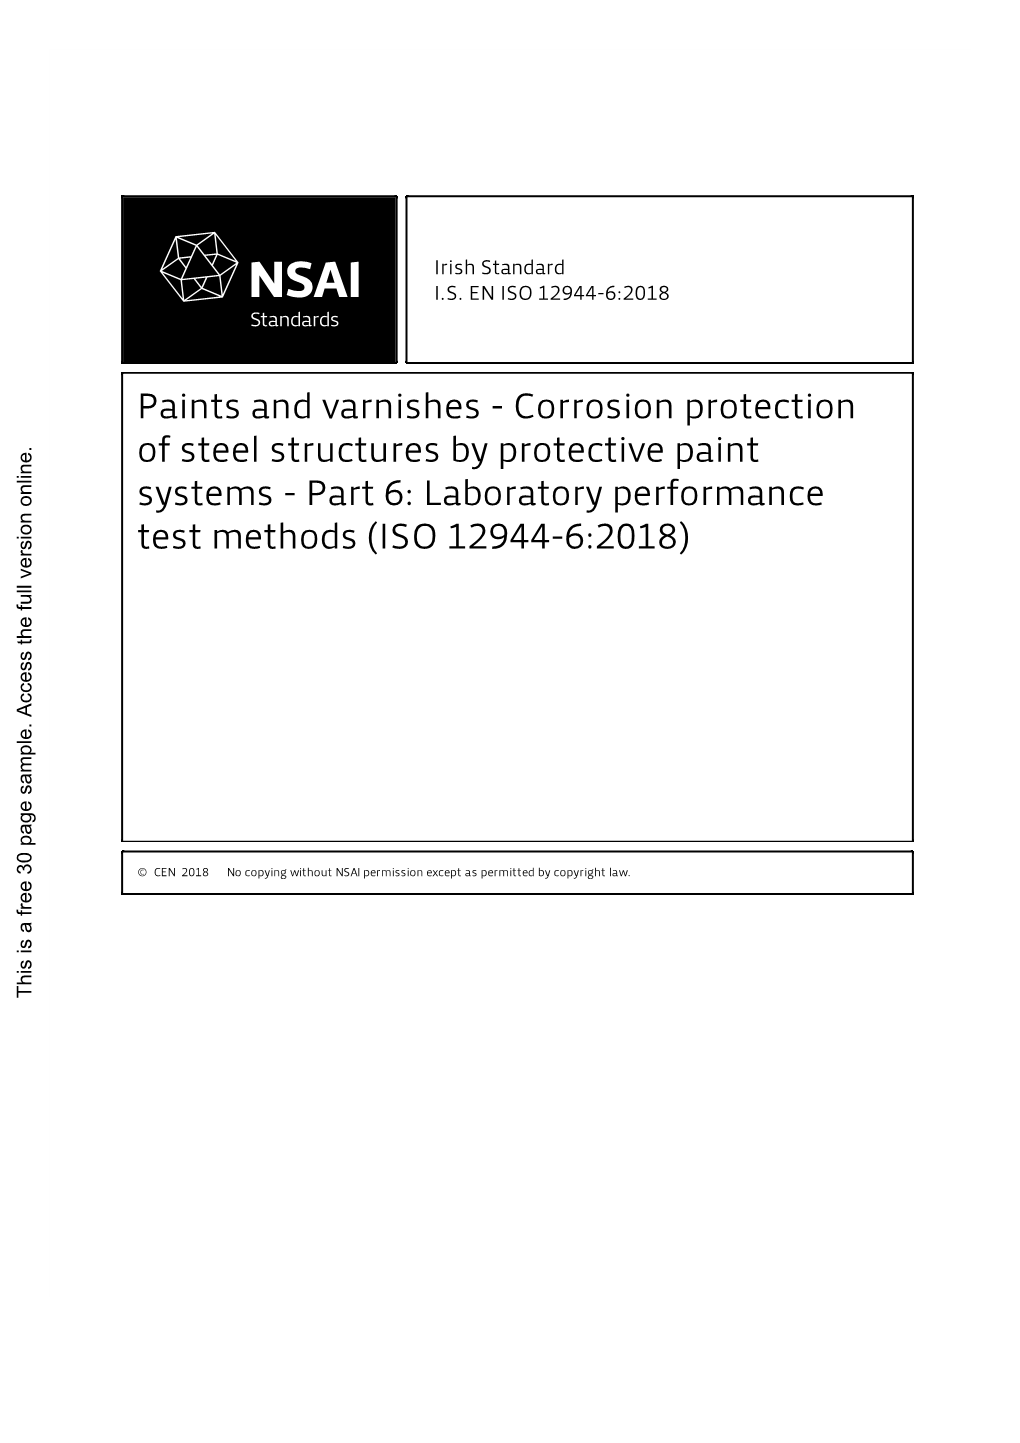 Corrosion Protection of Steel Structures by Protective Paint Systems - Part 6: Laboratory Performance Test Methods (ISO 12944-6:2018)